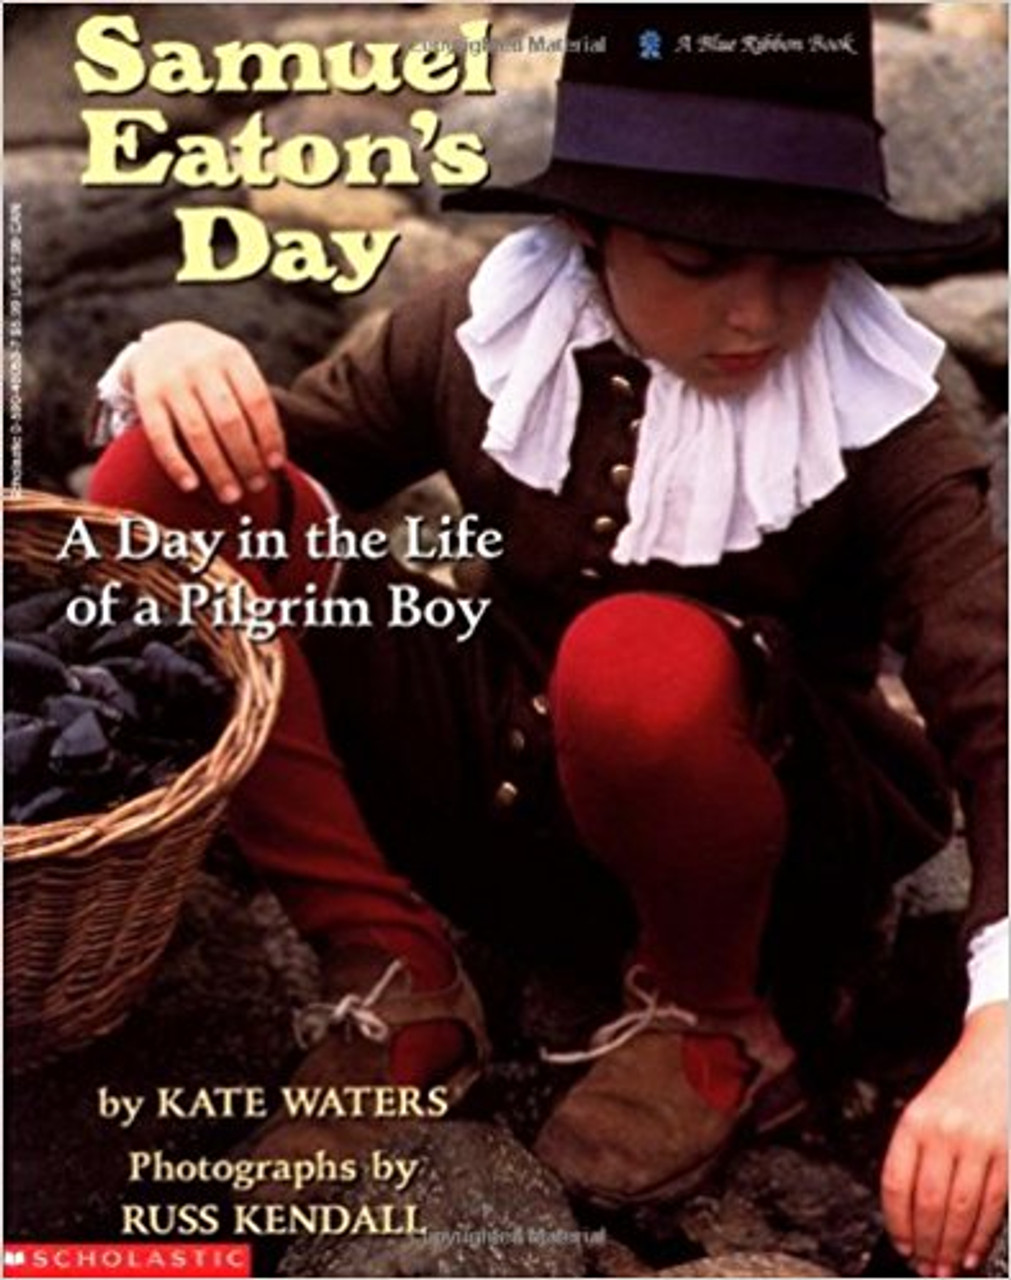 Young Samuel Eaton has hardly slept from excitement! Today he will do a man's work--helping with his first rye harvest. But as his hands become blistered and the sun beats down, he wonders if he's up to the task. An American Bookseller Pick of the Lists with more than 23,000 hardcover copies sold.